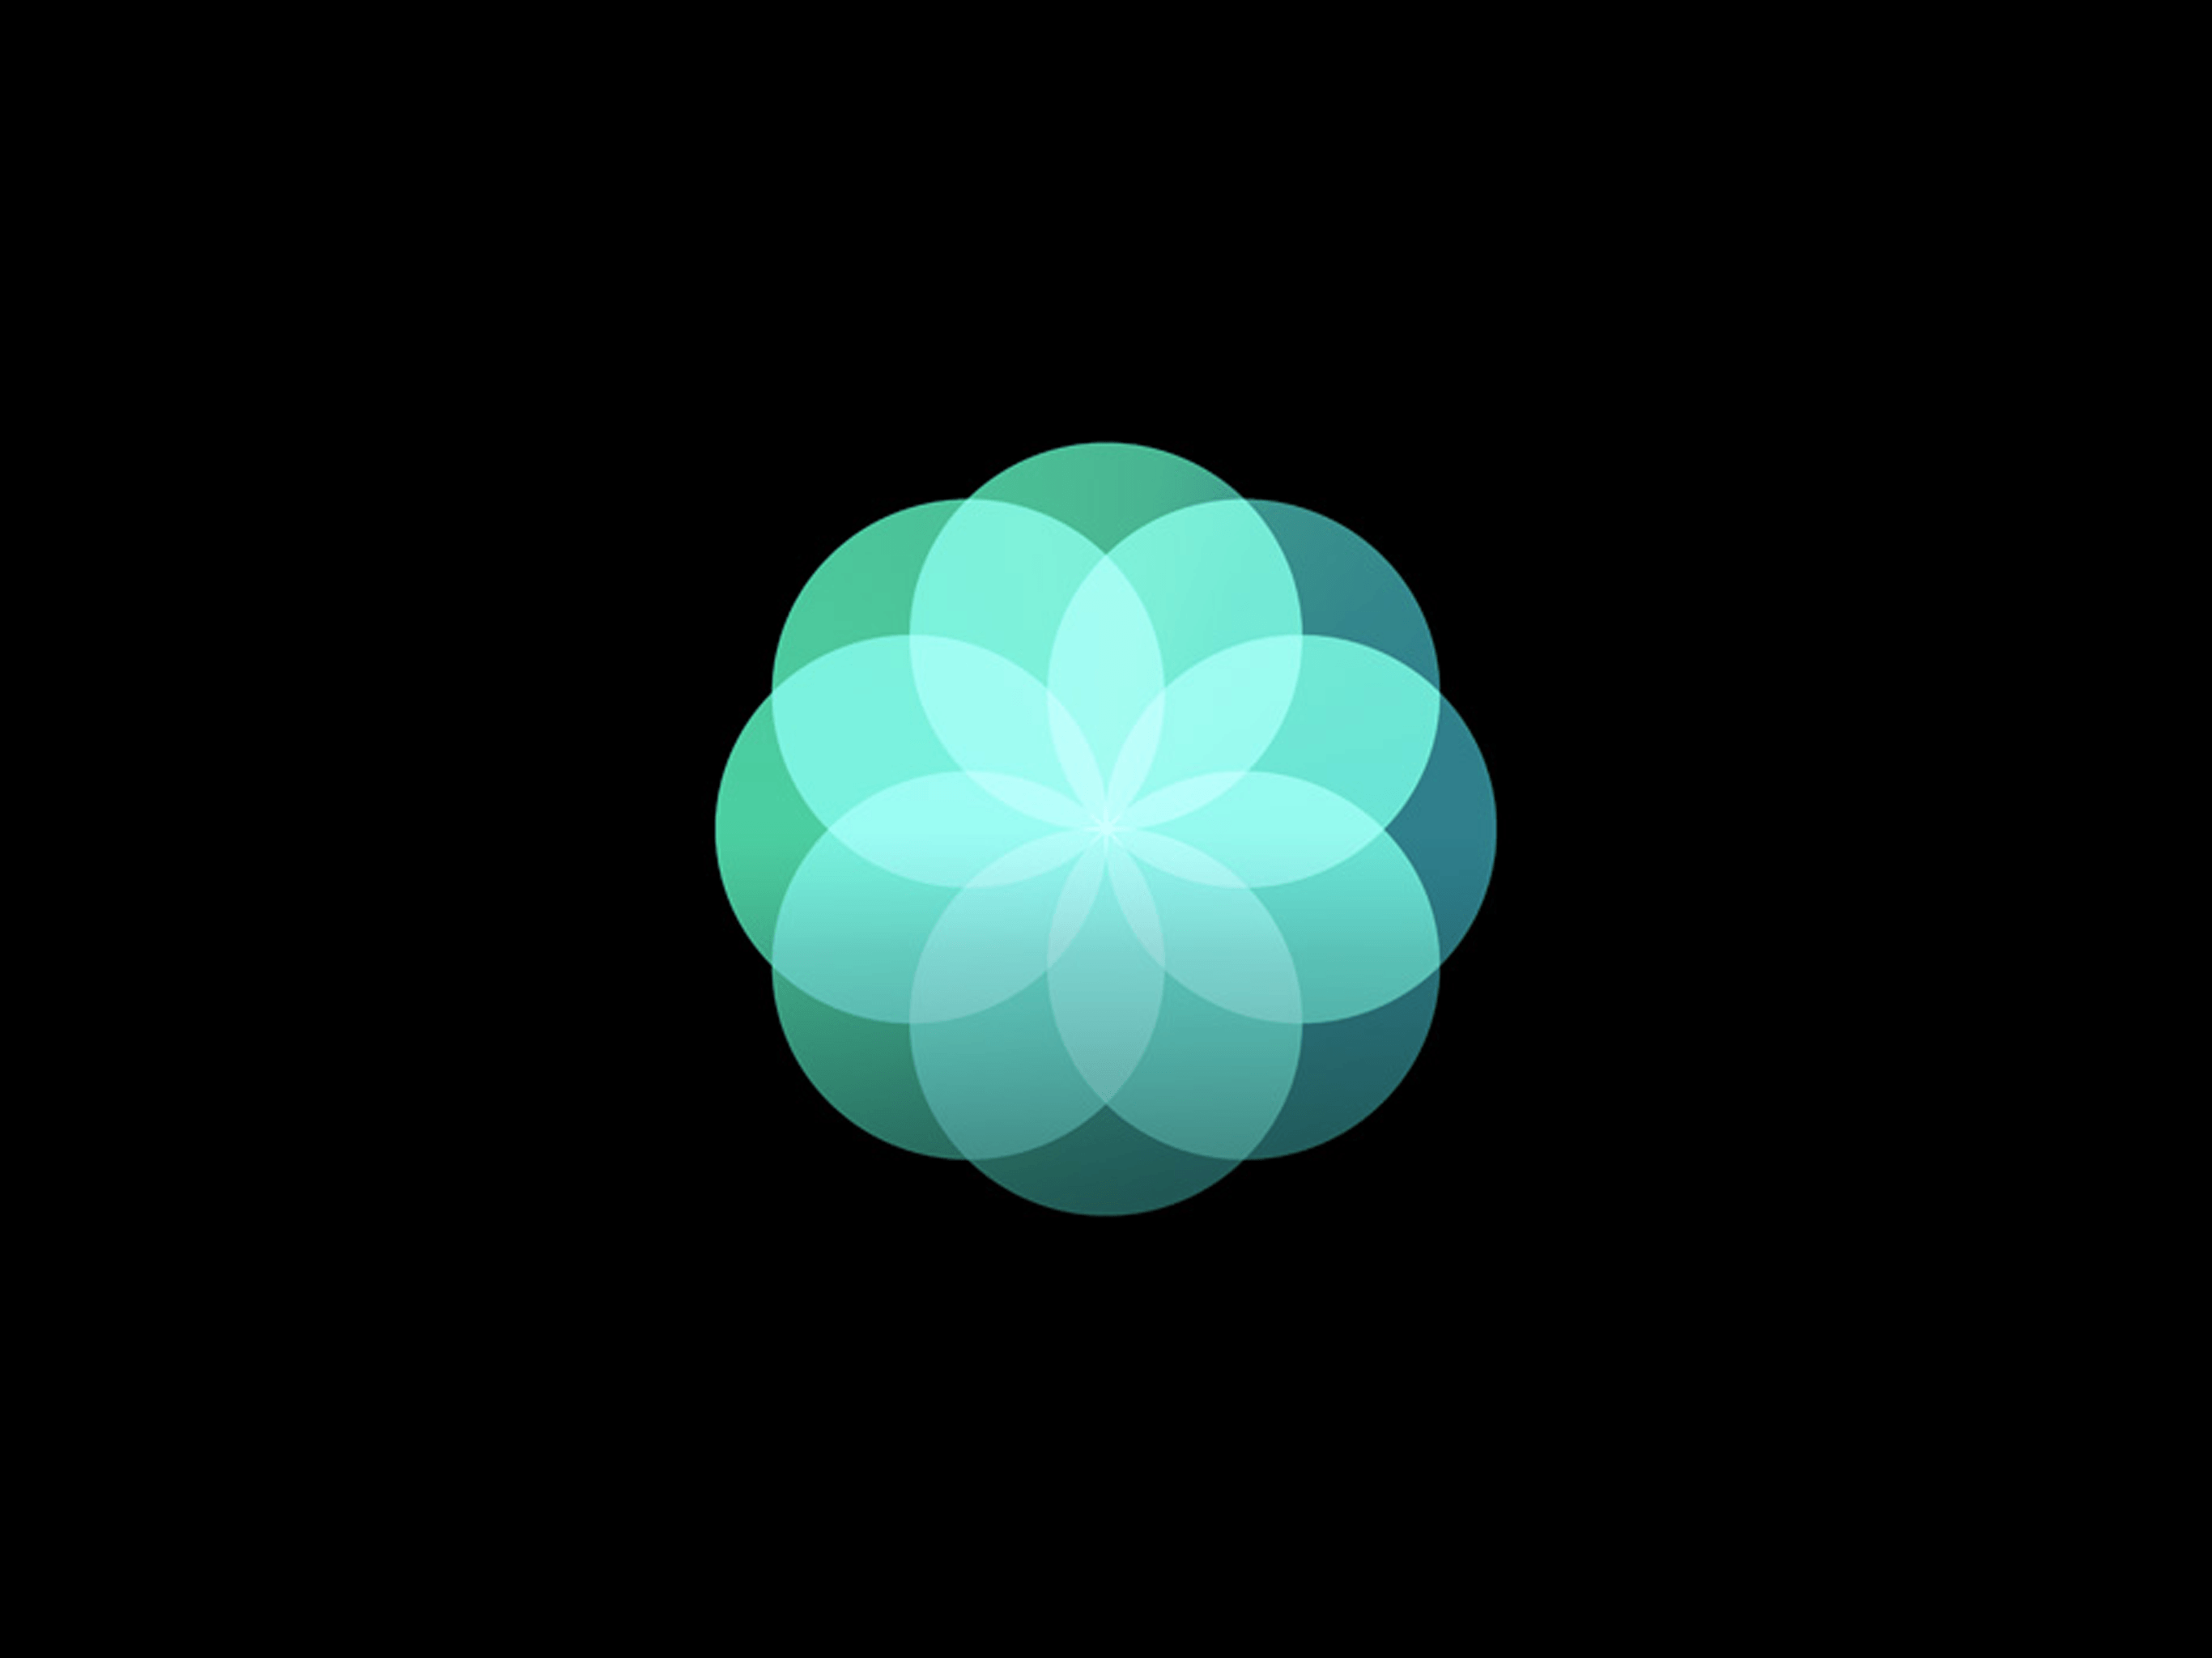 Wallpaper inspired by the watchOS 3 Breathe app